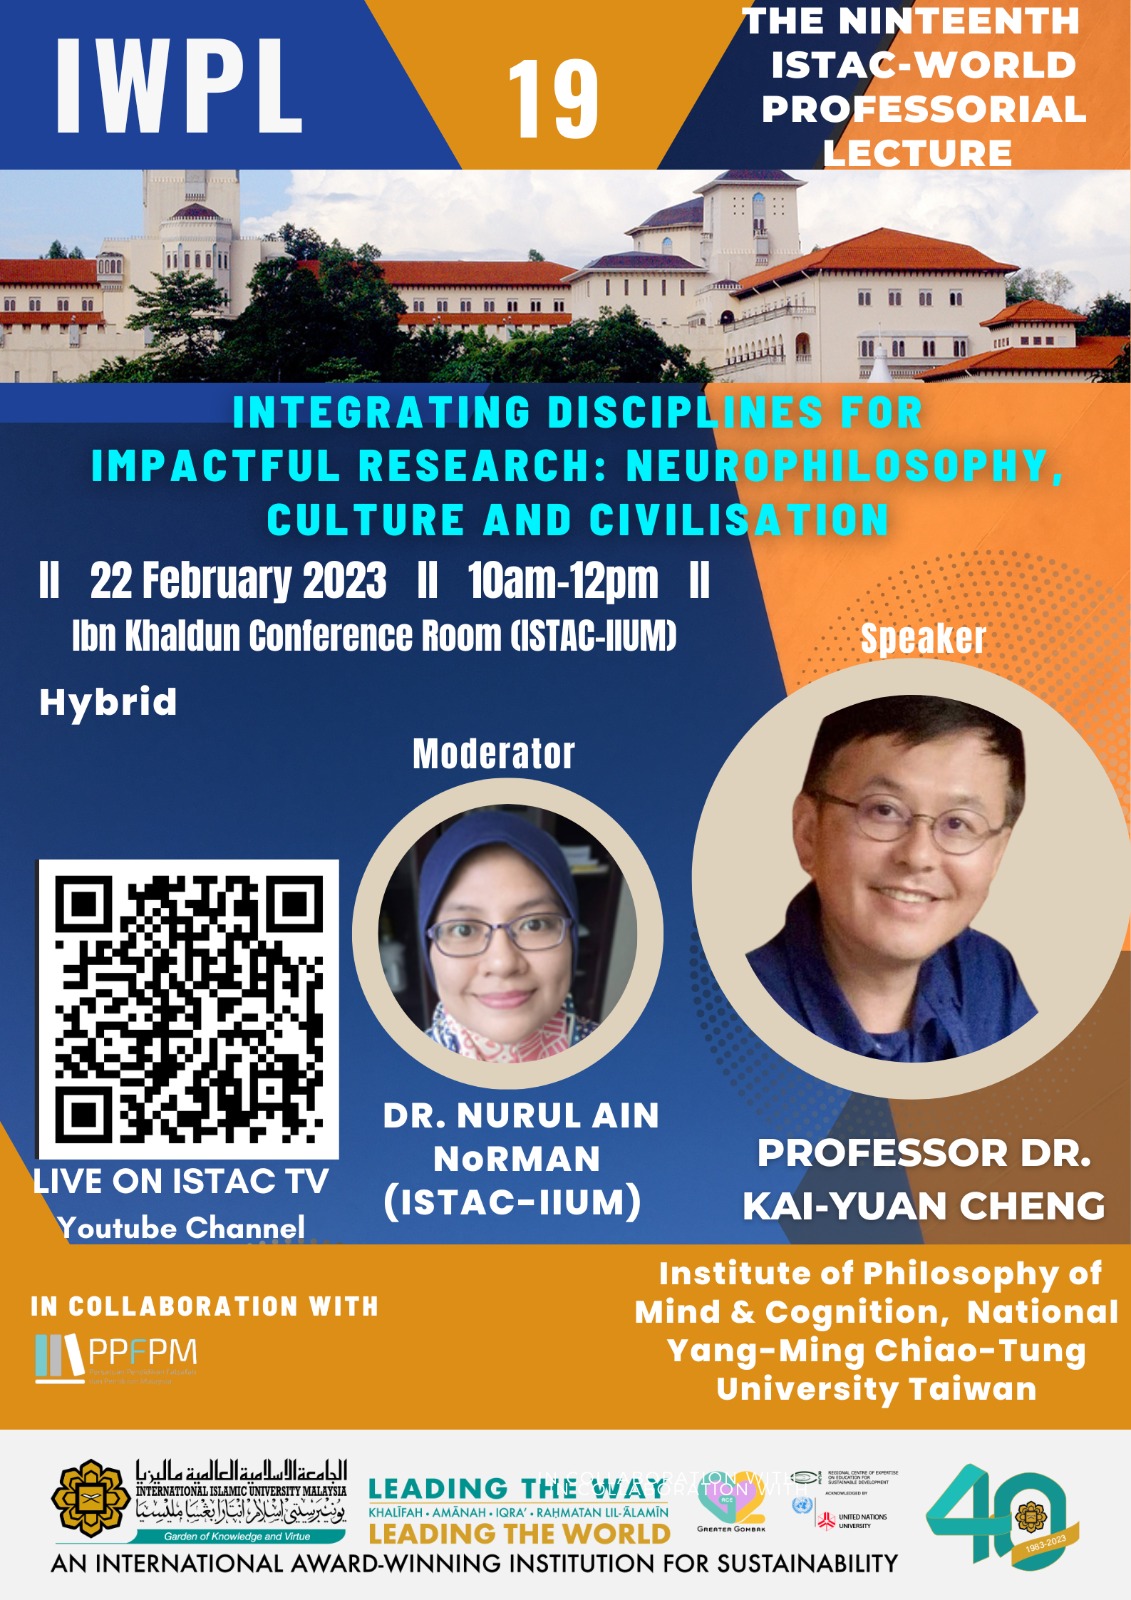 IWPL 19 - THE NINETEENTH ISTAC-WORLD PROFESSORIAL LECTURE